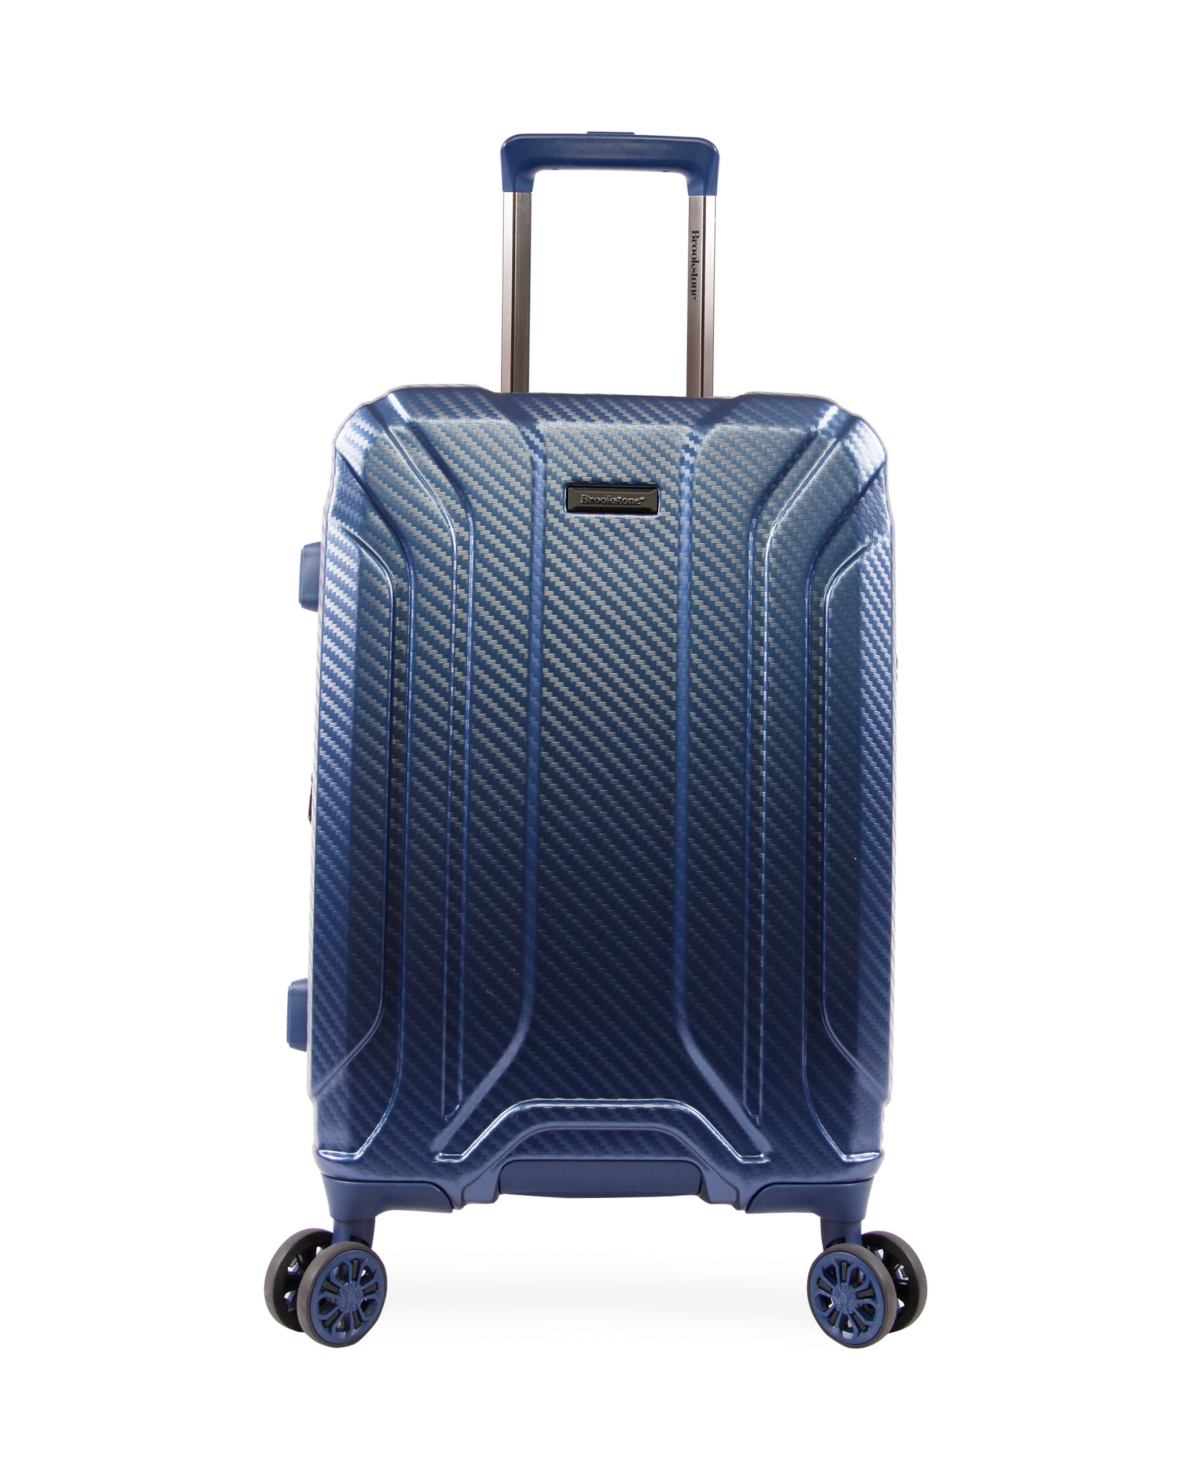 Brookstone Keane 21" Hardside Carry-on Luggage With Charging Port In Metallic